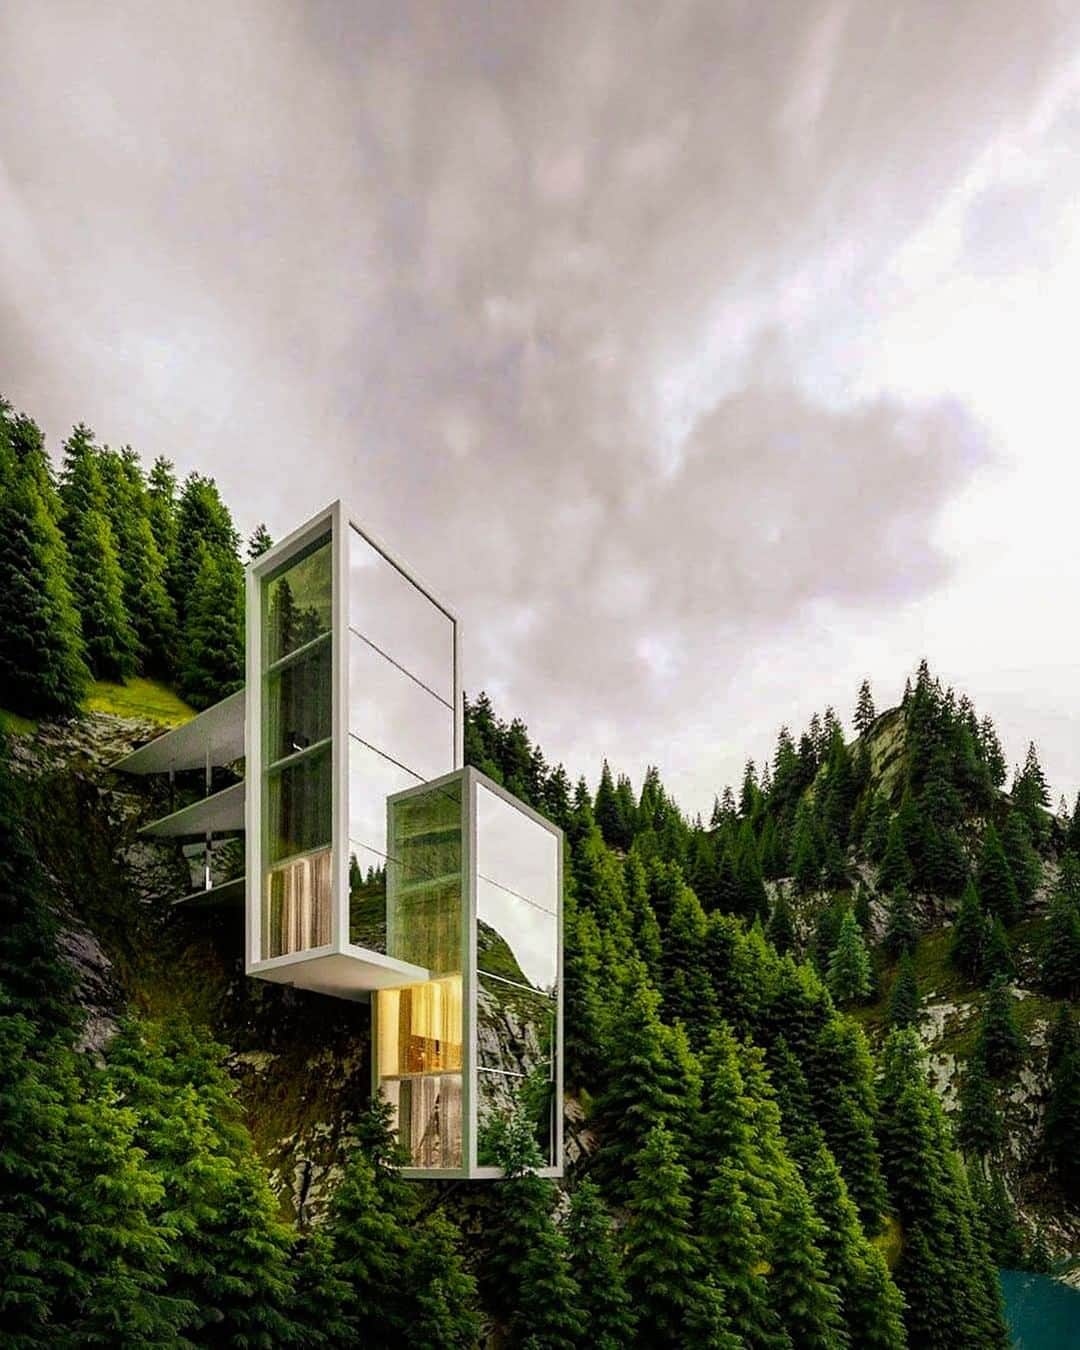 Architecture - Housesのインスタグラム：「⁣ ▼ A place that challenges the boundaries of architecture ▼⁣ The 𝐆𝐞𝐢𝐫𝐚𝐧𝐠𝐞𝐫 𝐇𝐨𝐮𝐬𝐞 is an amazing contemporary concept of a house inspired by the natural landscape. Can you imagine yourself lost in the woods of Norway? 🥰 Leave your comment!⁣ _____⁣⁣⁣⁣⁣⁣⁣⁣⁣⁣ 📐& 💻  @alex_nerovnya  📍 Geiranger, Norway⁣ #archidesignhome⁣⁣⁣⁣⁣⁣ _____⁣⁣⁣⁣⁣⁣⁣⁣⁣⁣ #architecture #architect #arquitectura #architettura #archilovers #home #house ‎#amazing #amazingarchitecture⁣⁣ #archilovers #home #house ‎#archigram #houseinspo #houseoftheday #beautifulhouse #homestyle #homeinspiration #dreamhome #renderlovers #architecturedesign #renderbox #architectureporn #render」